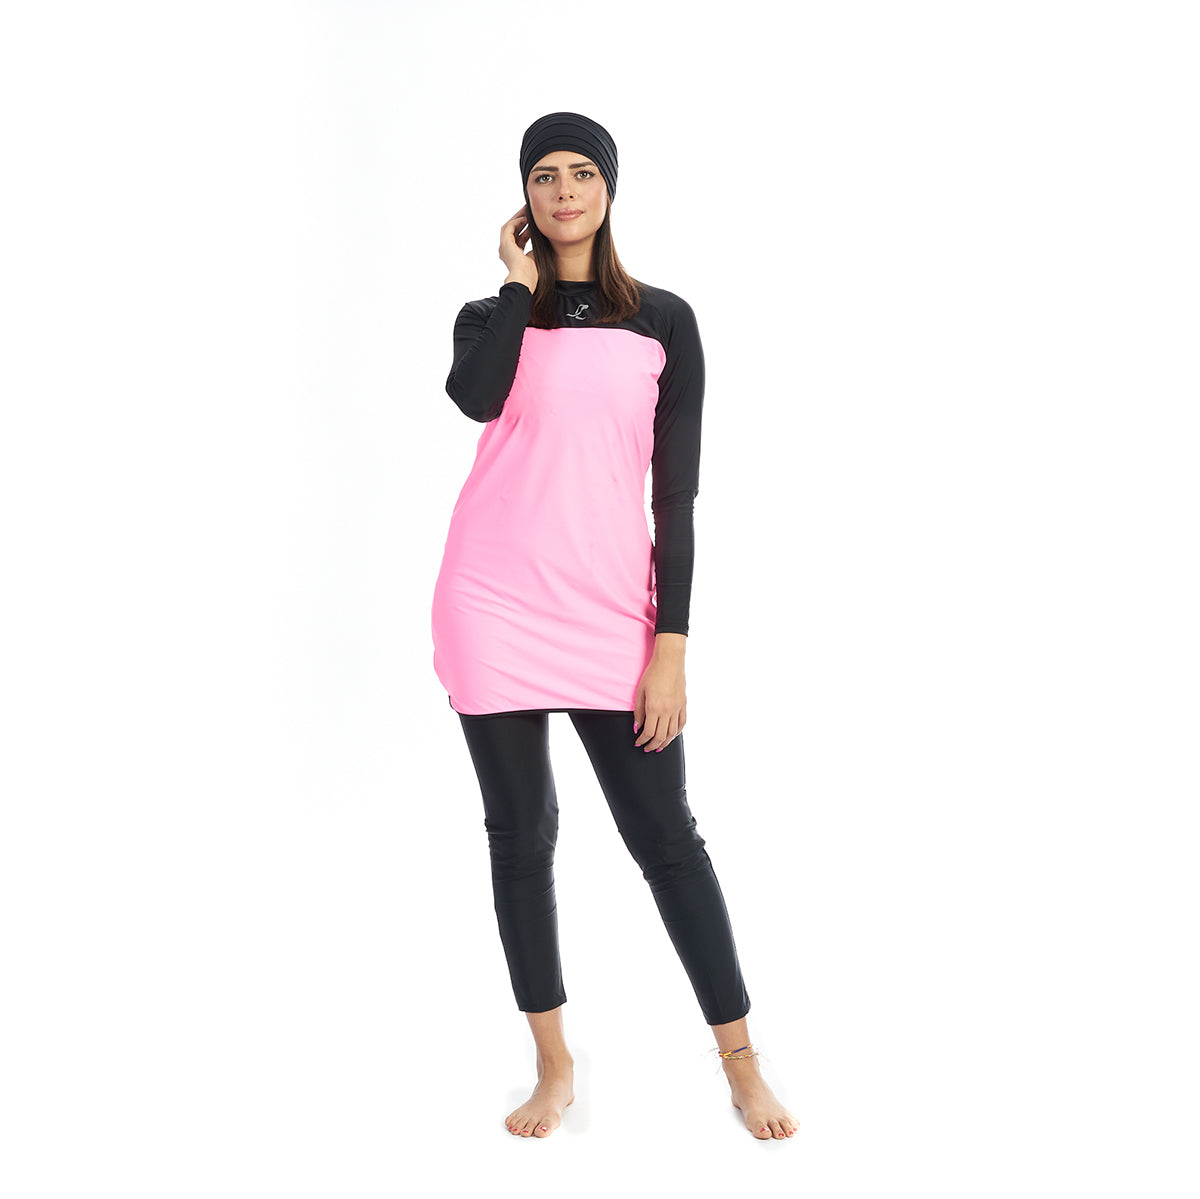 Energetics Full Covered Swimsuit For Women, Top, Pants + Bonnet, Pink & Black - 3 Pieces